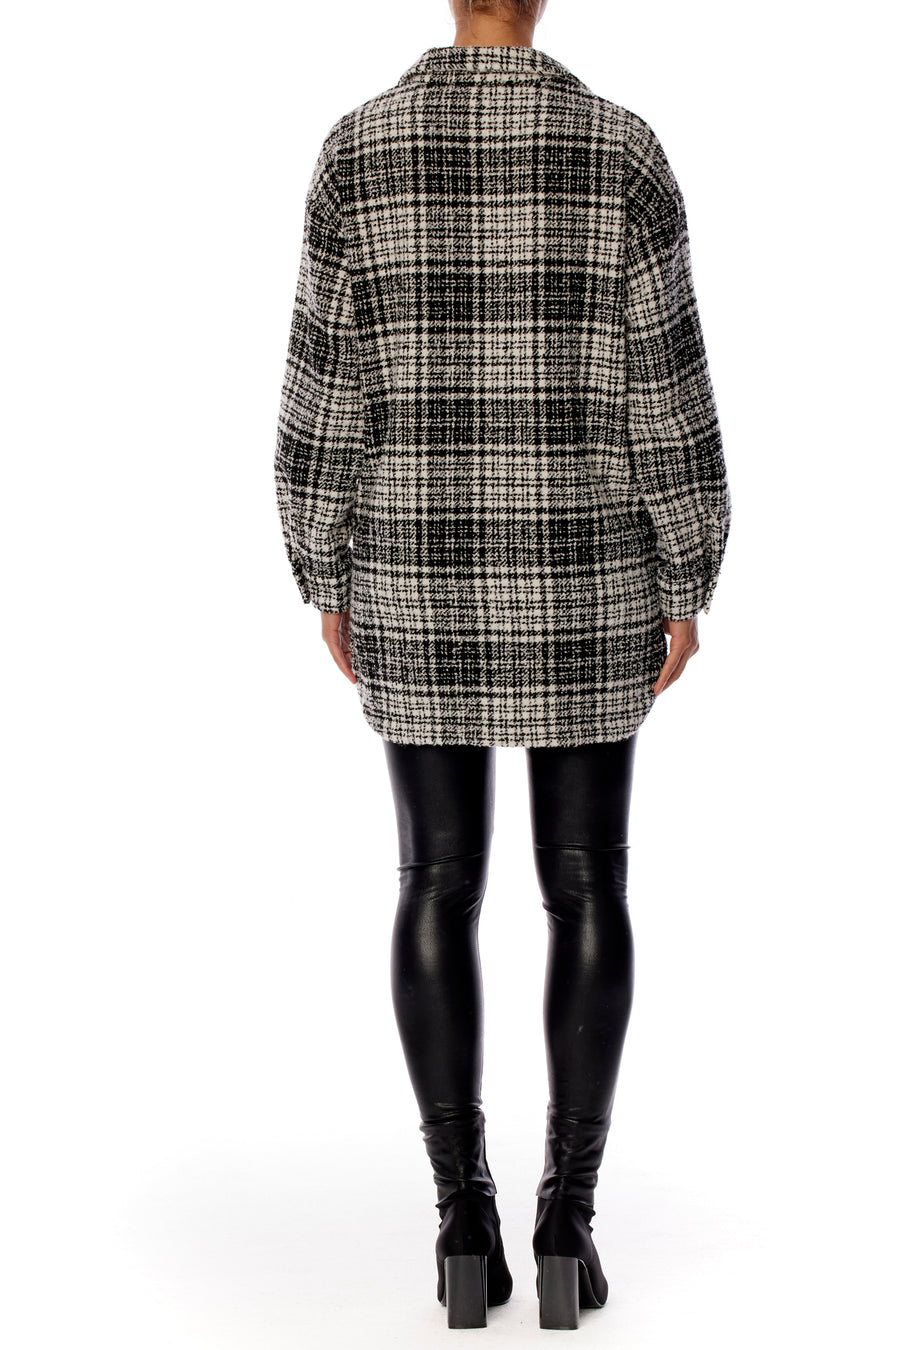 Cozy black and white plaid button up top with shirttail hem, collar and front and side pockets